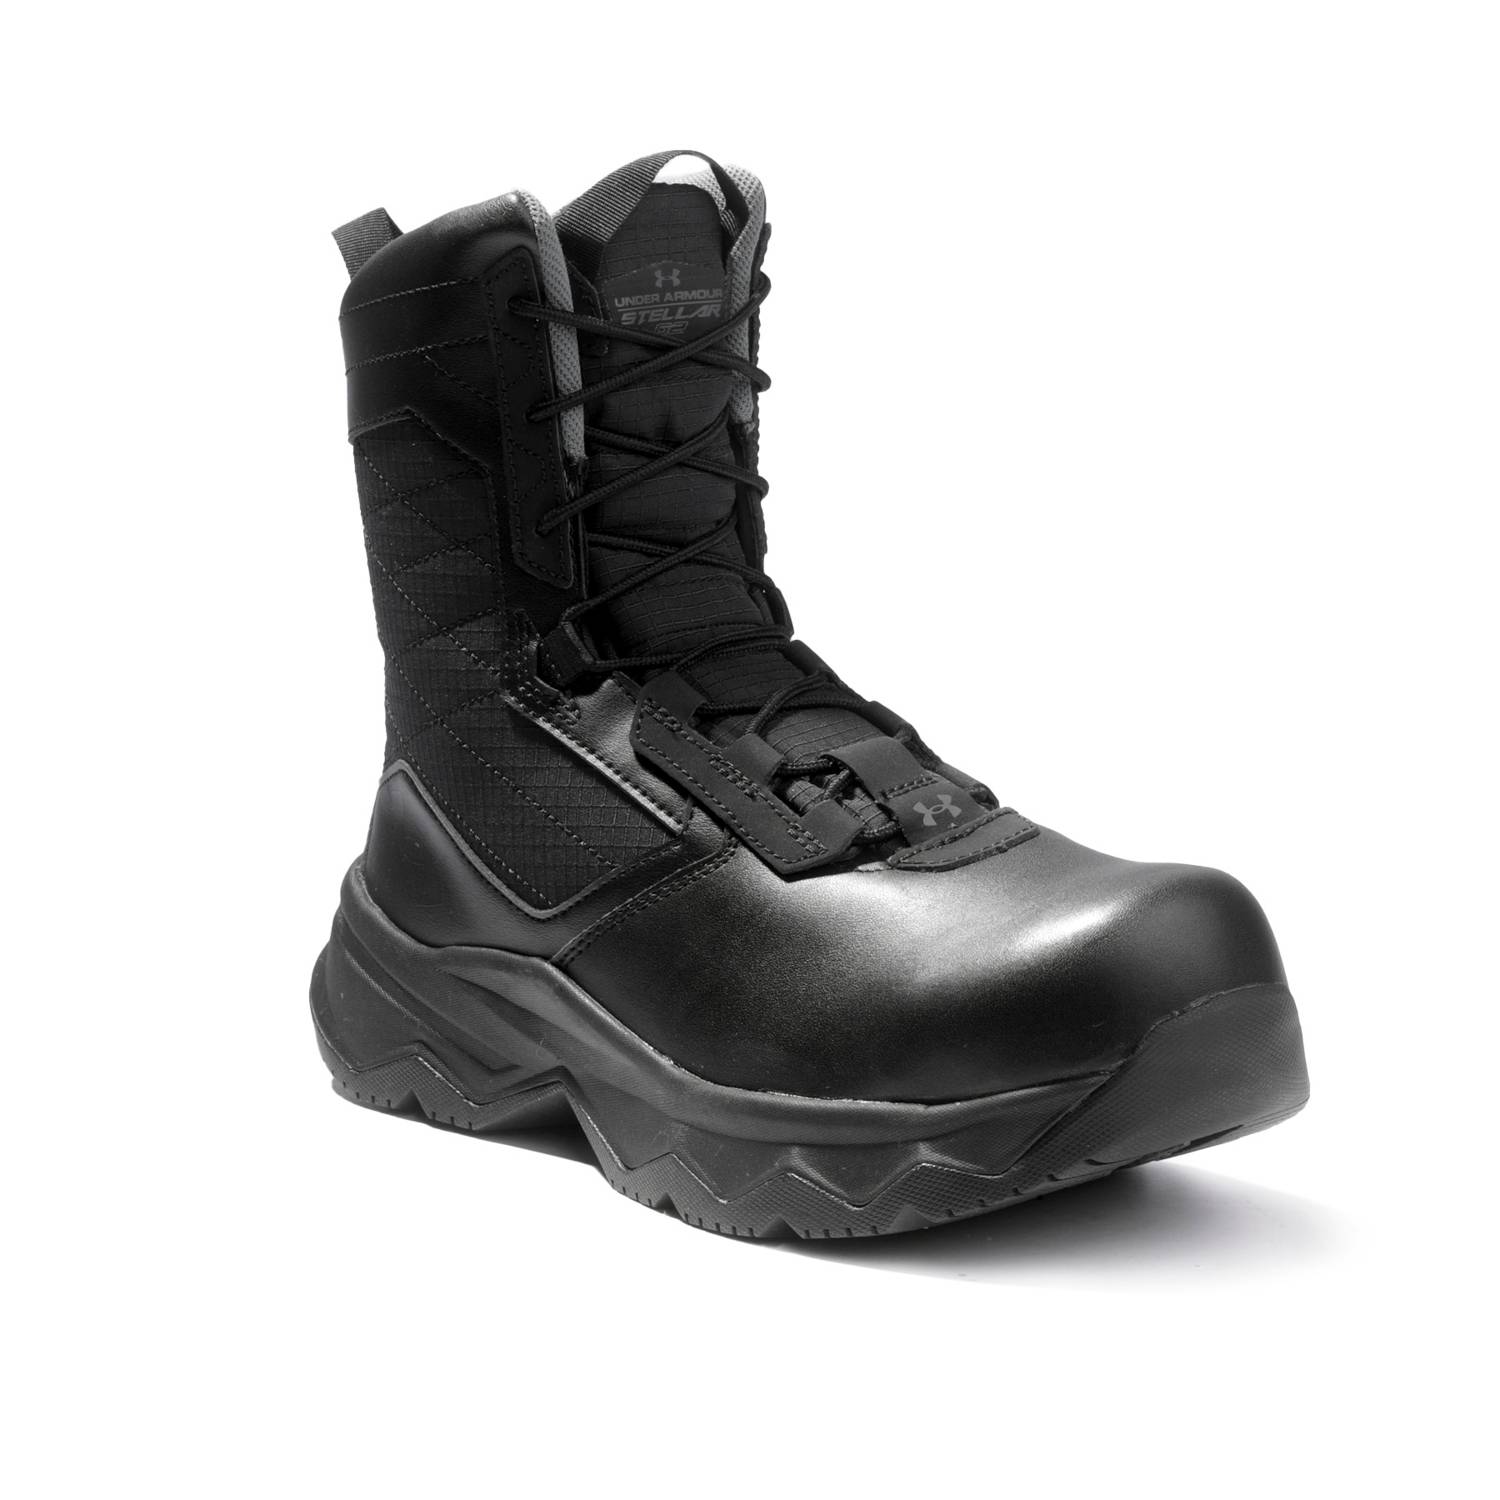 Under Armour Stellar G2 Tactical Boots